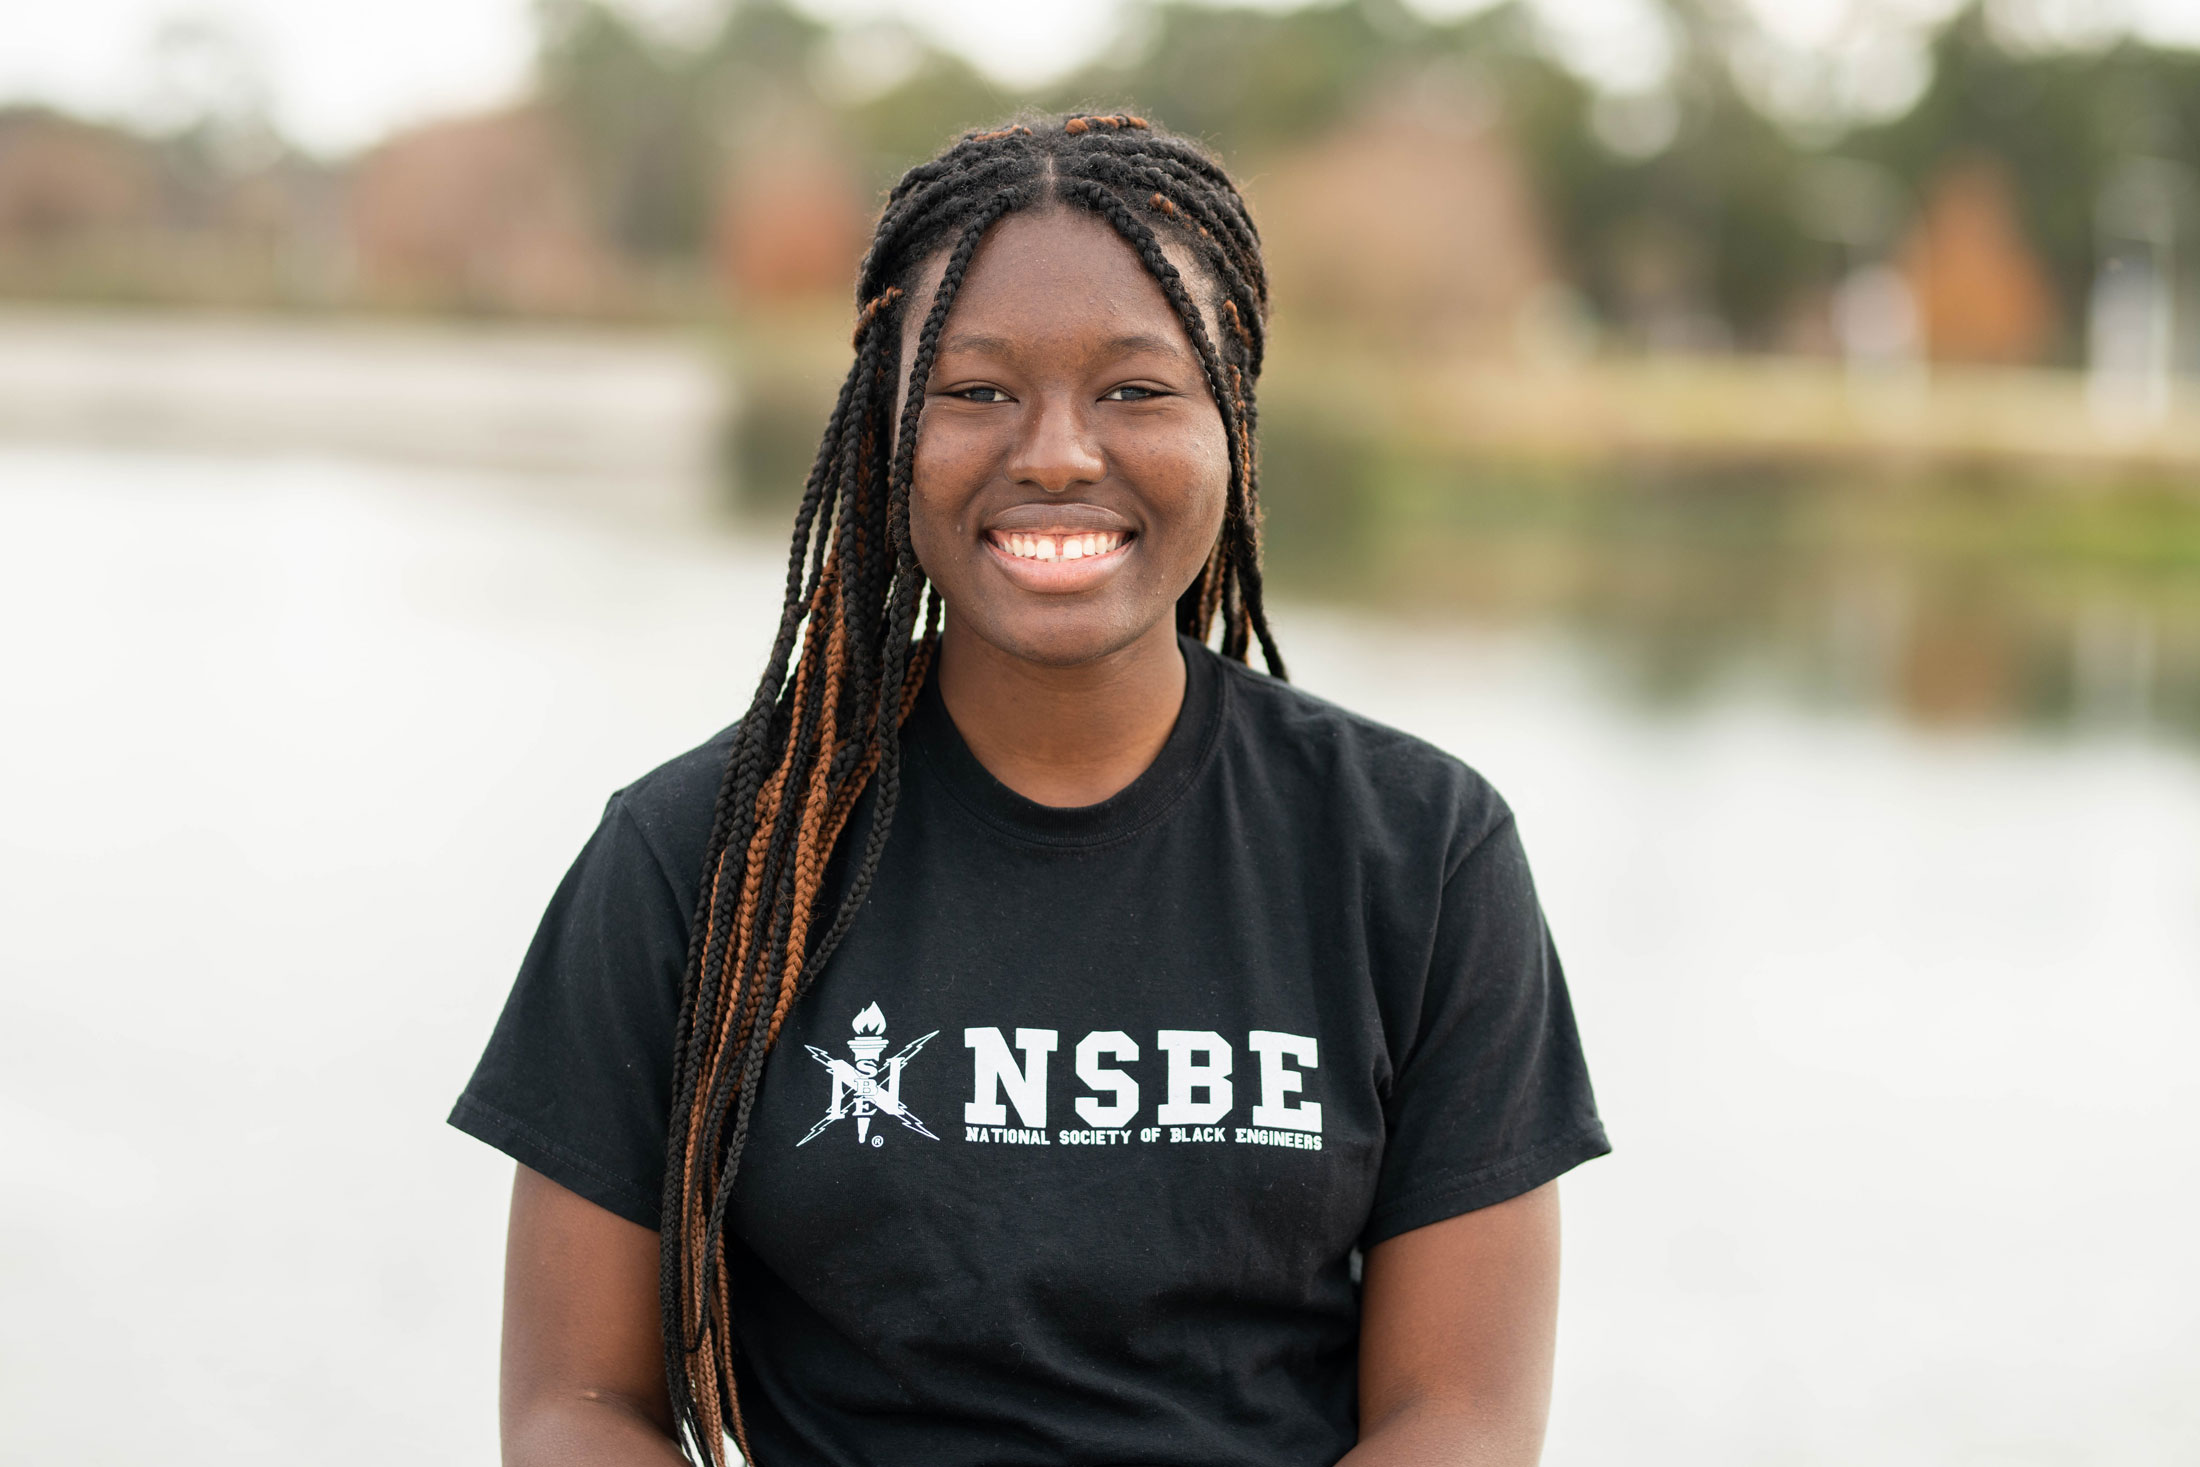 NSBE offers connection, opportunity to budding Black engineers at Florida Poly